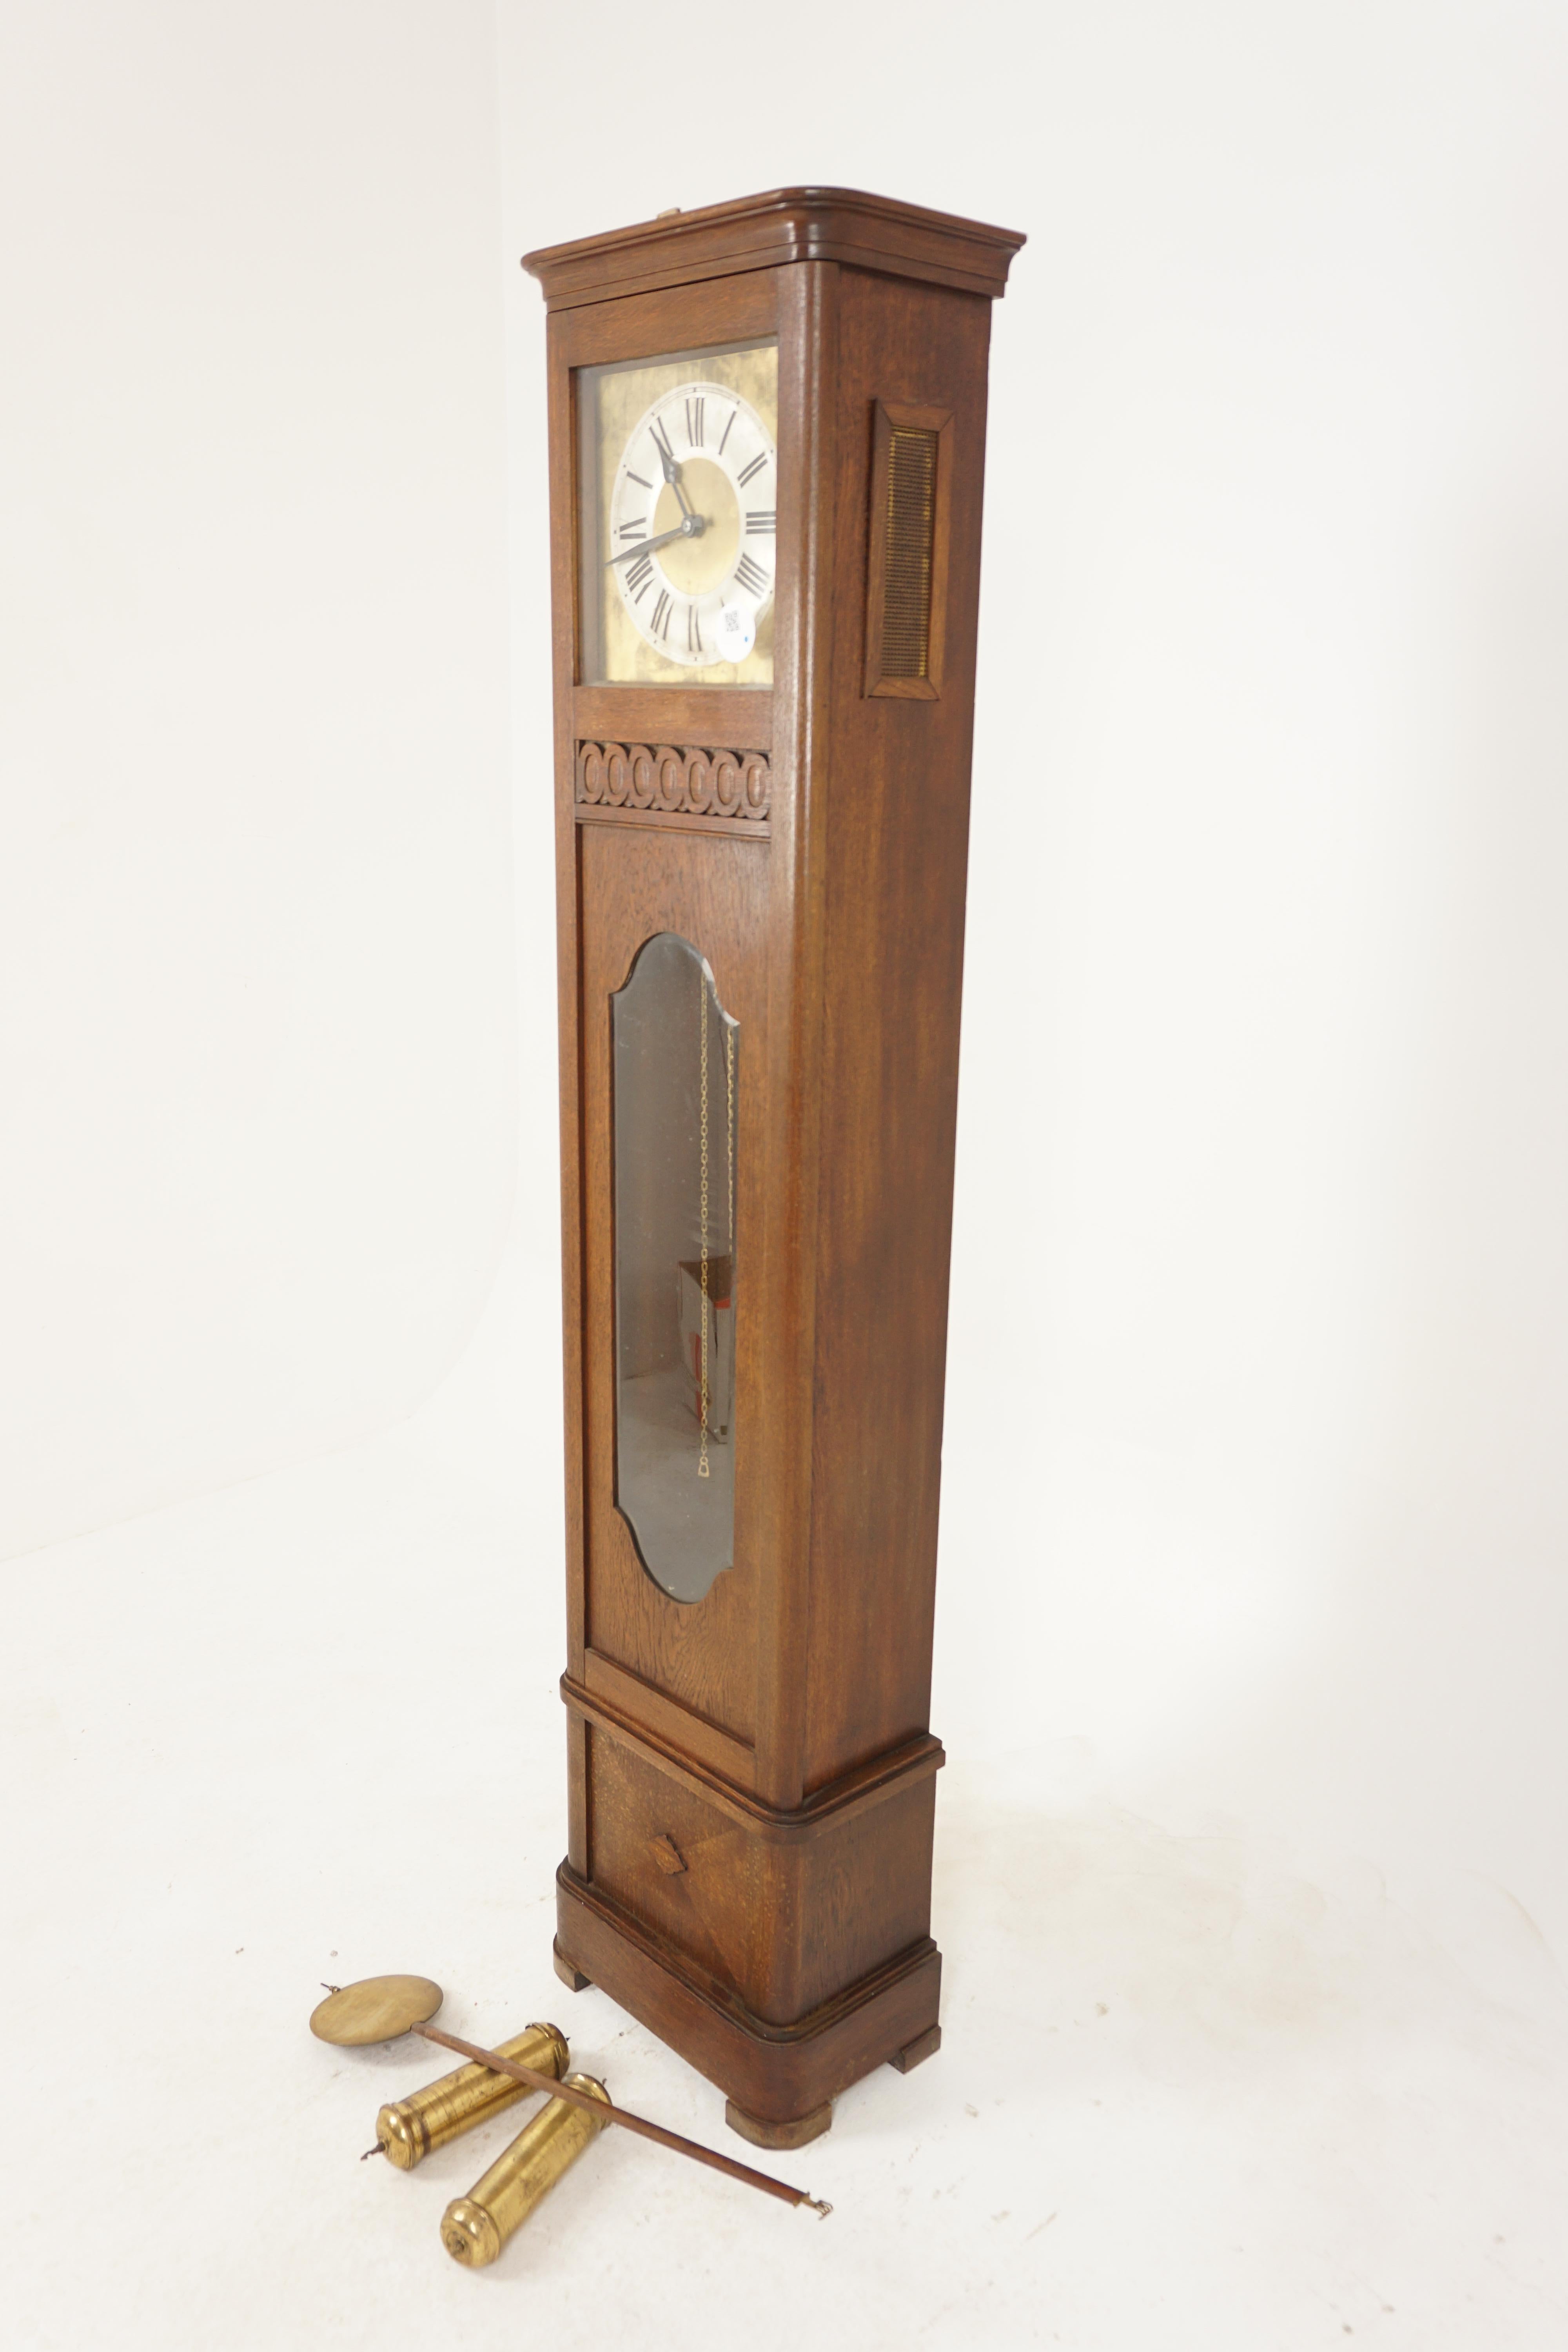 Vintage Art Deco oak grandfather clock long case clock, Scotland 1930, H922

Scotland 1930
Solid Oak
Original Finish
An eight day striking movement
Solid carved oak case
Silver and brass dial with roman numerals
Glass front door opens to